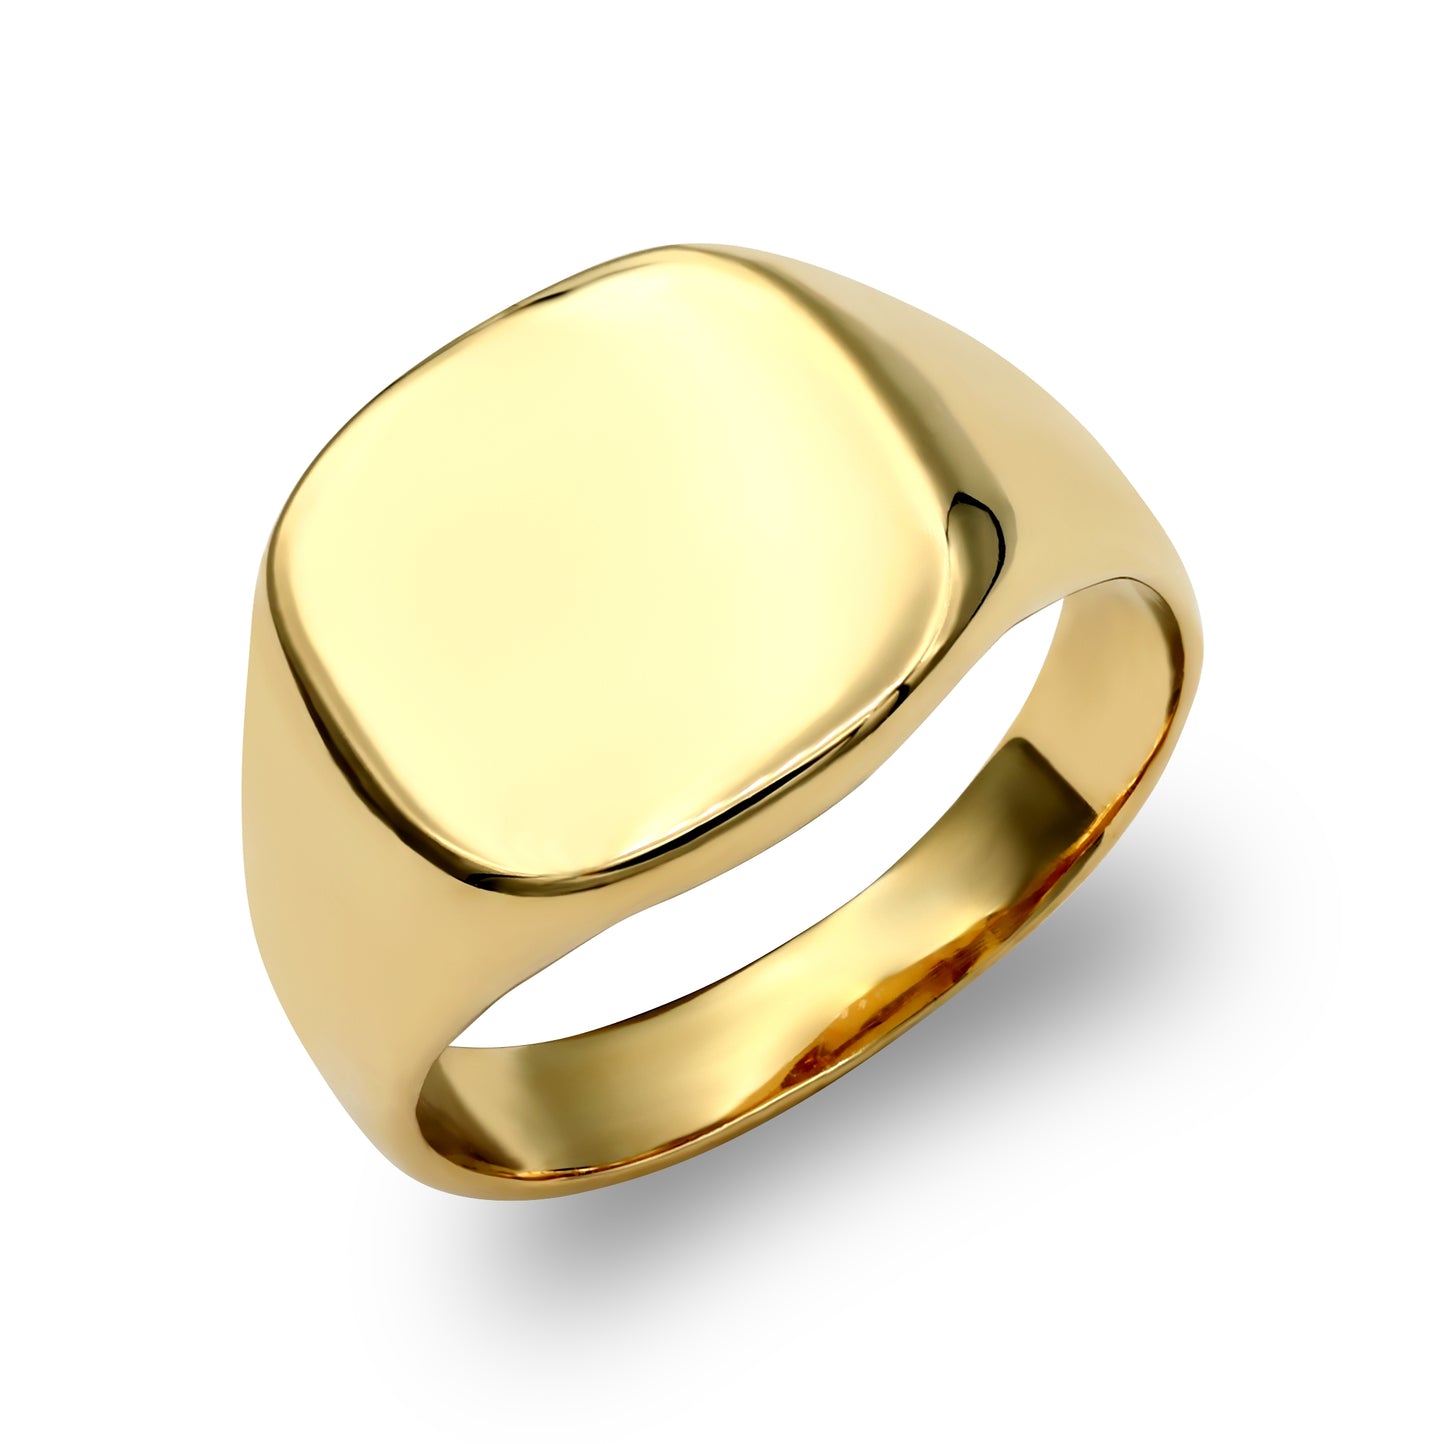 Mens Solid 9ct Gold  Square Cushion Signet Ring - JRN144